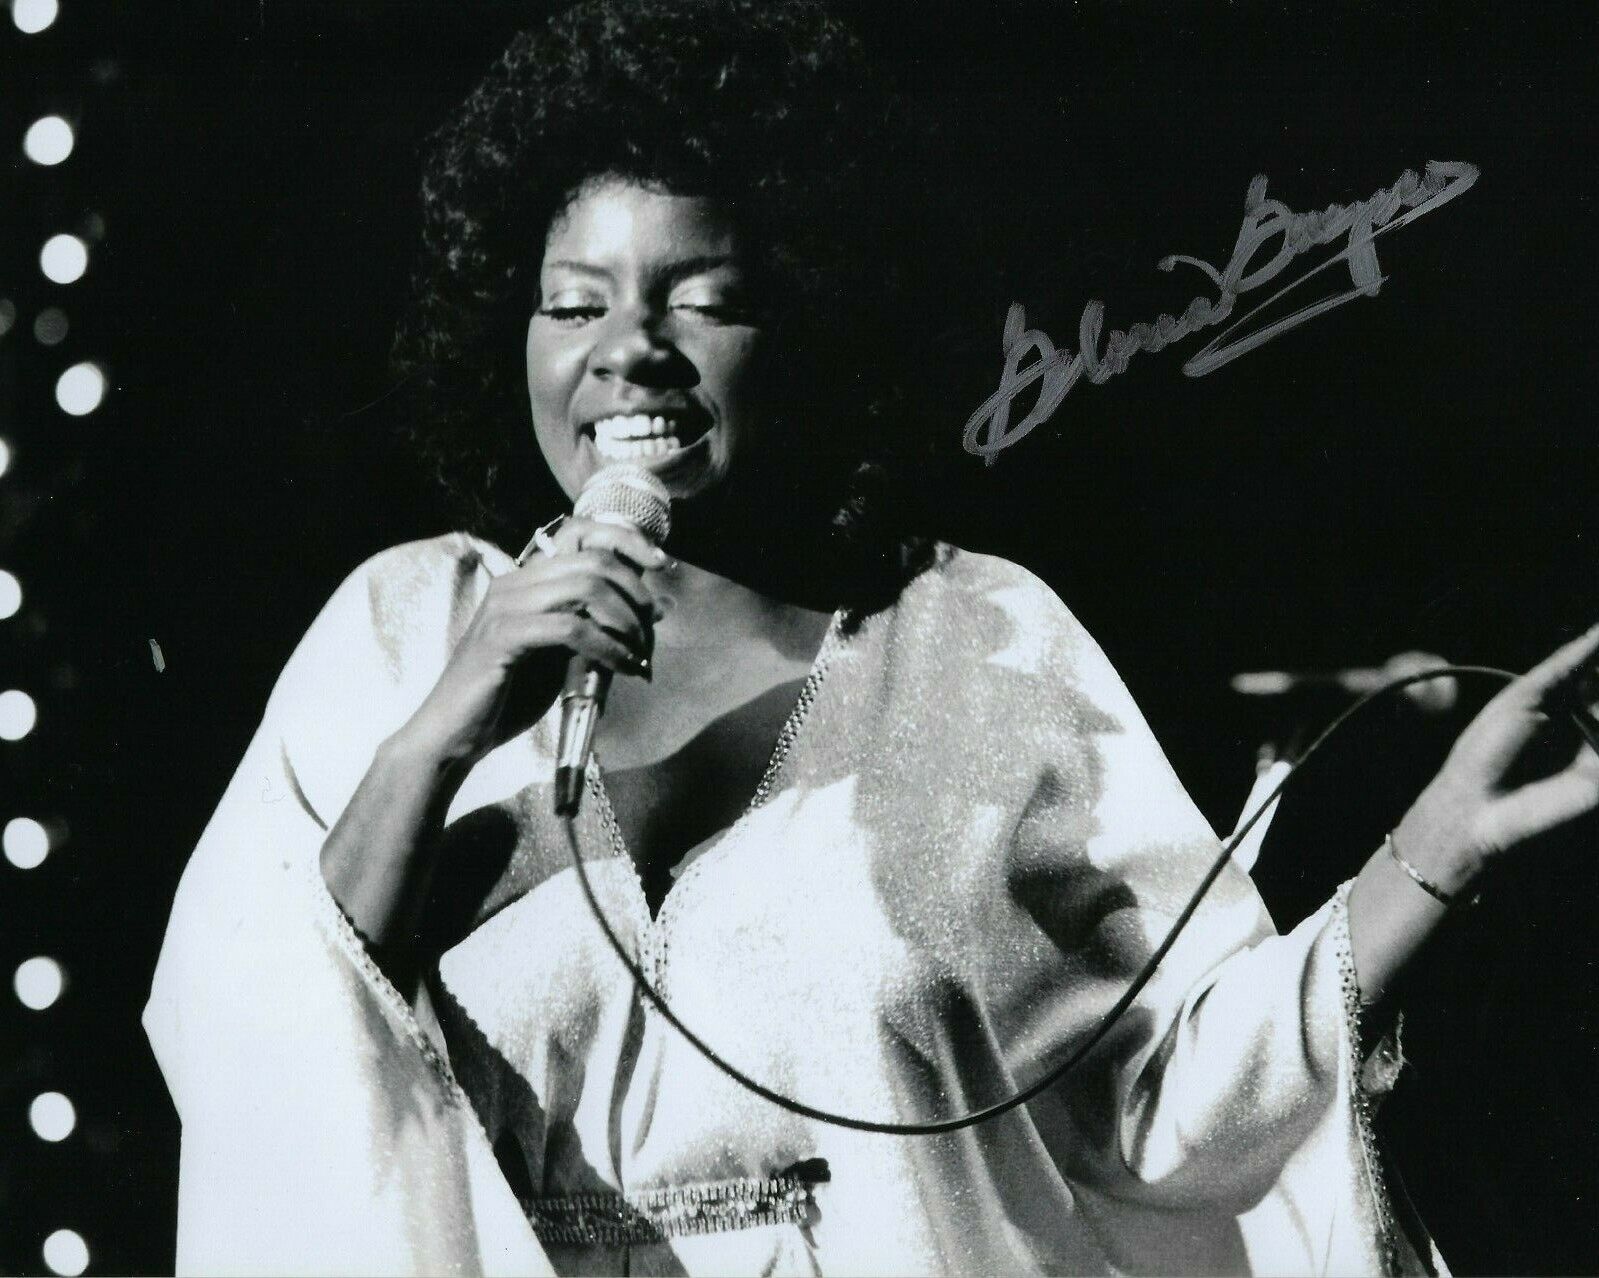 GFA I Will Survive R&B Star * GLORIA GAYNOR * Signed 8x10 Photo Poster painting PROOF G4 COA